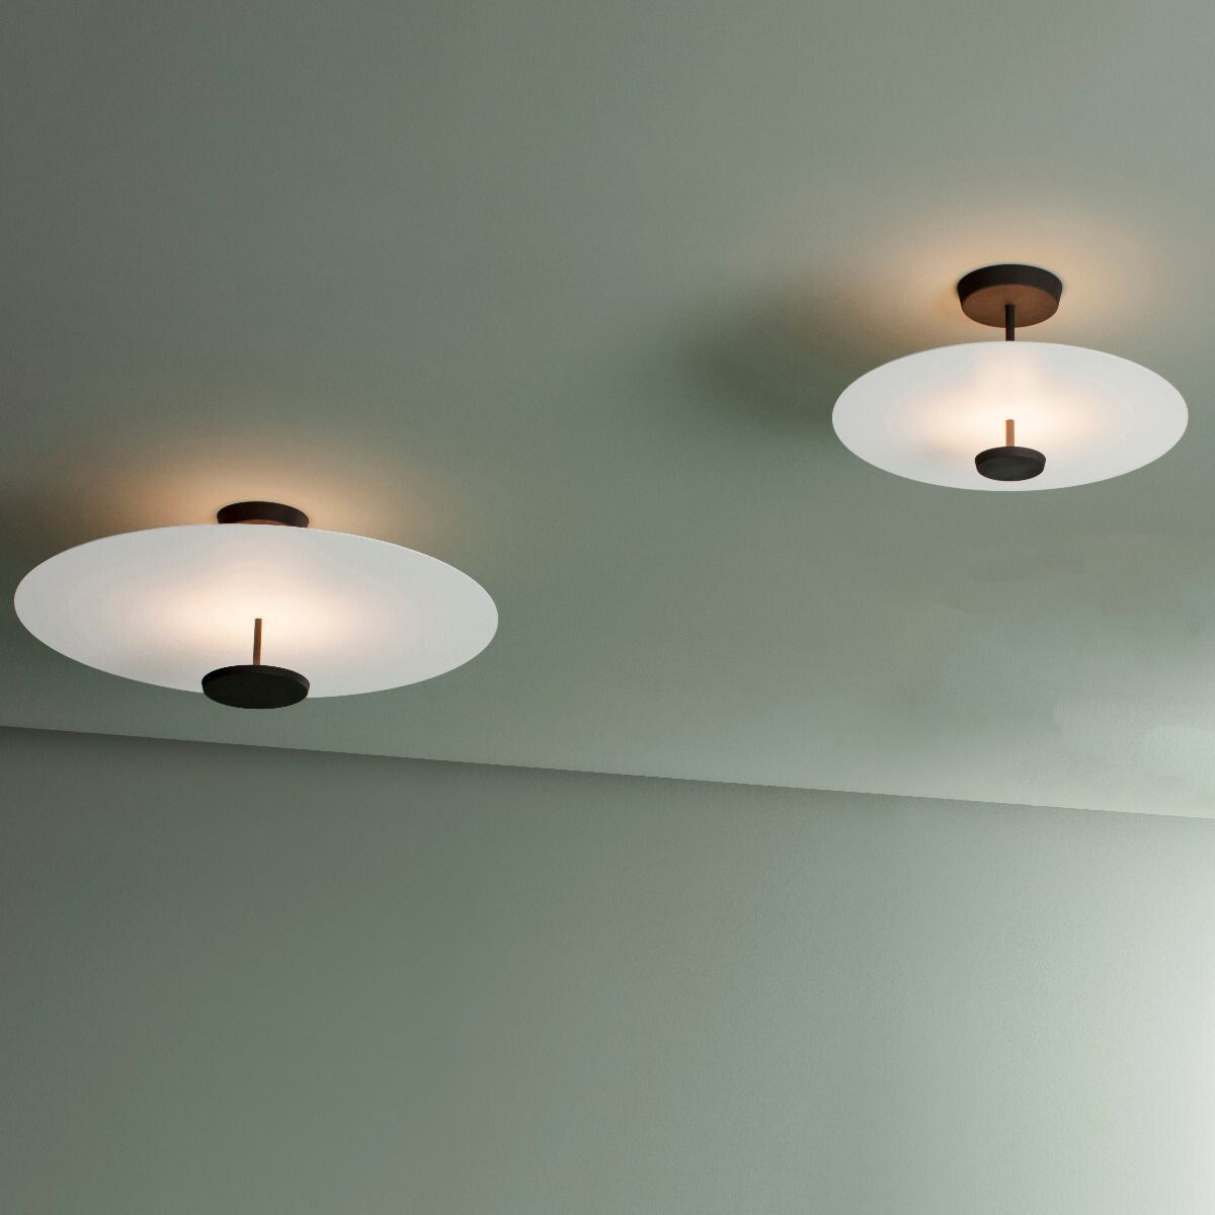 Where To Buy Ceiling Lights